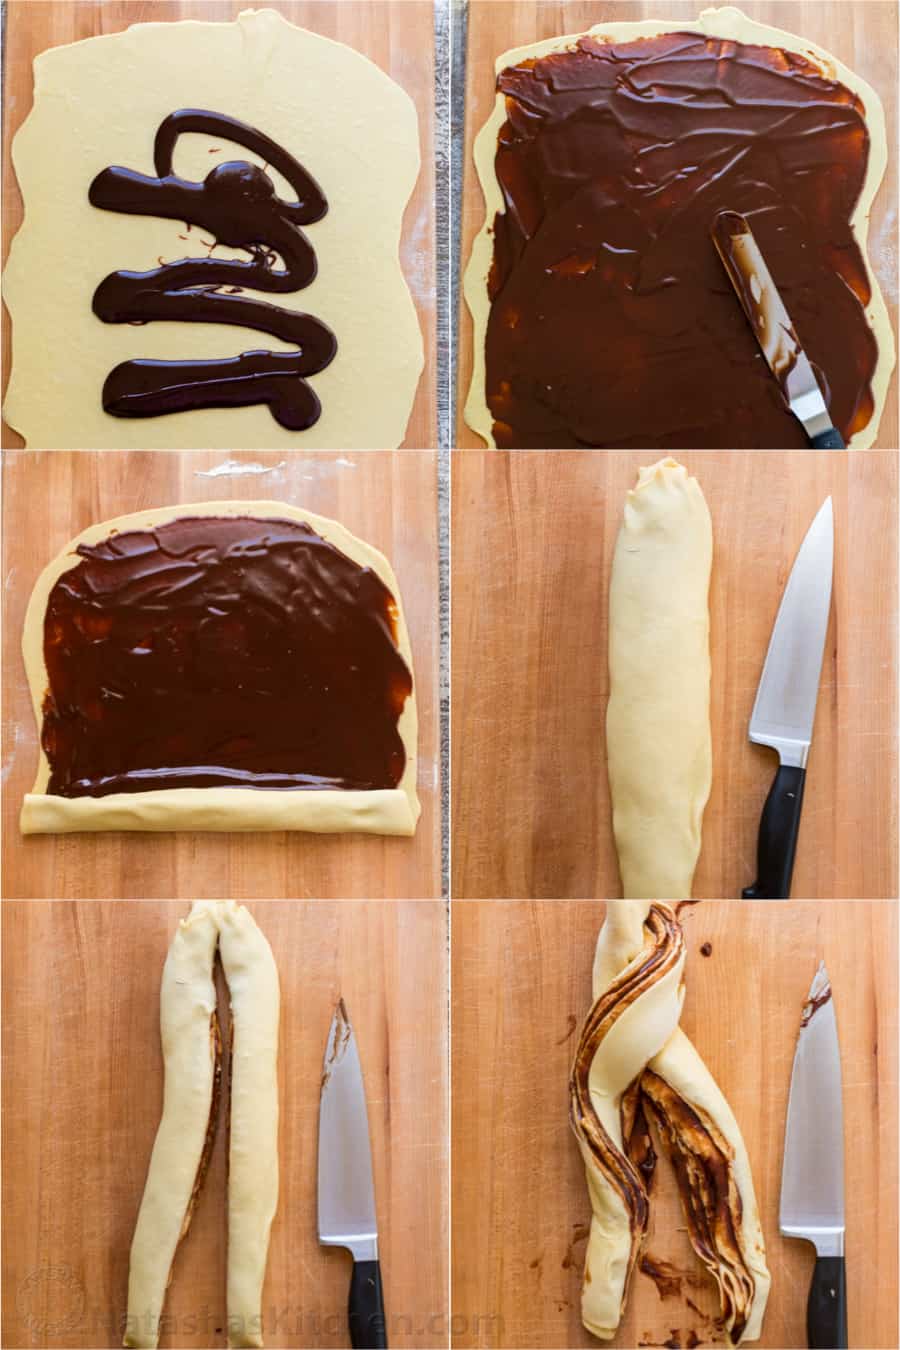 Photo collage showing how to fill, roll, and cut the dough for a chocolate babka.